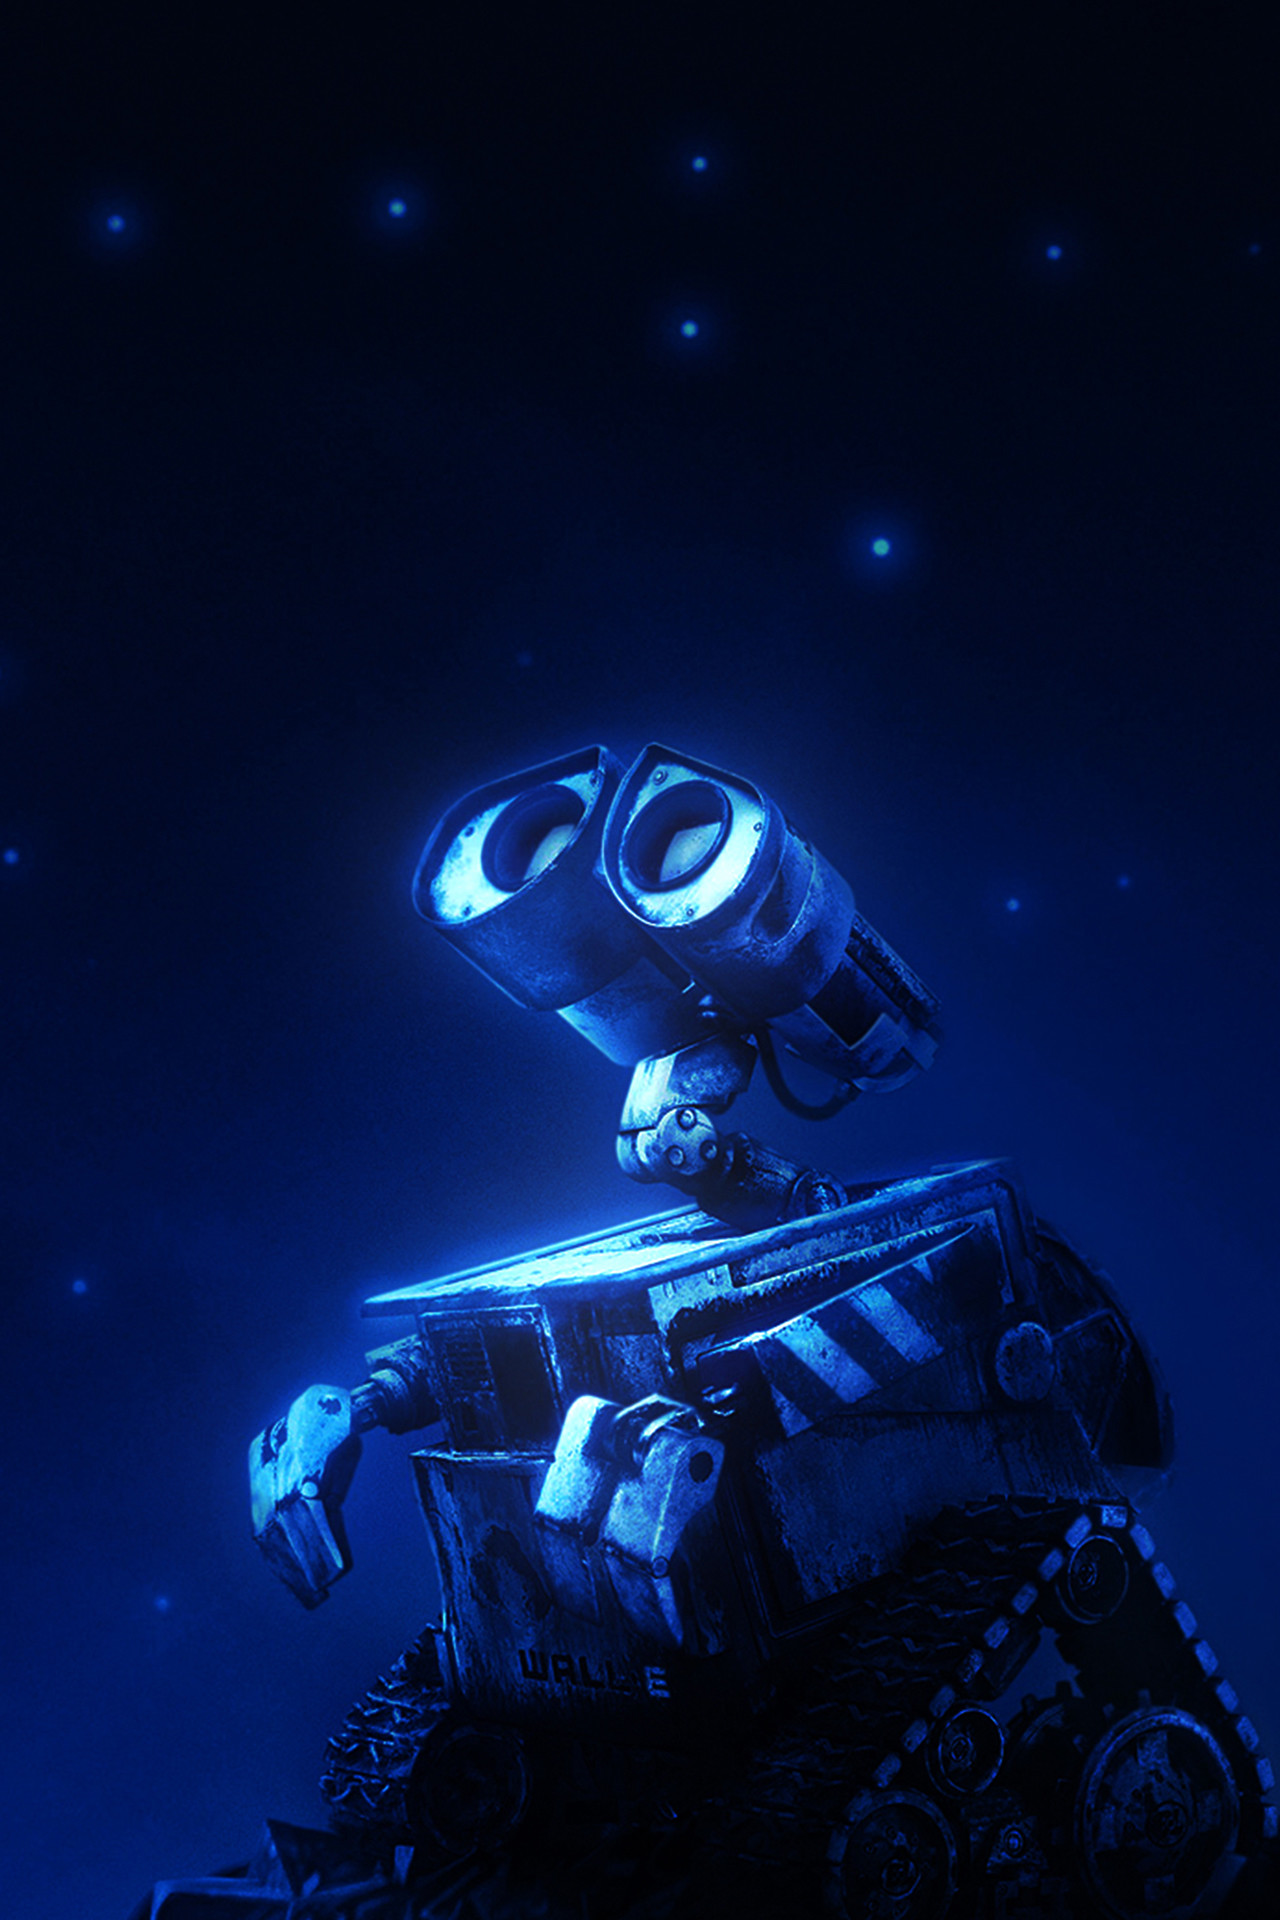 WALLE Wallpapers  Top 20 Best WALLE Wallpapers  HQ 